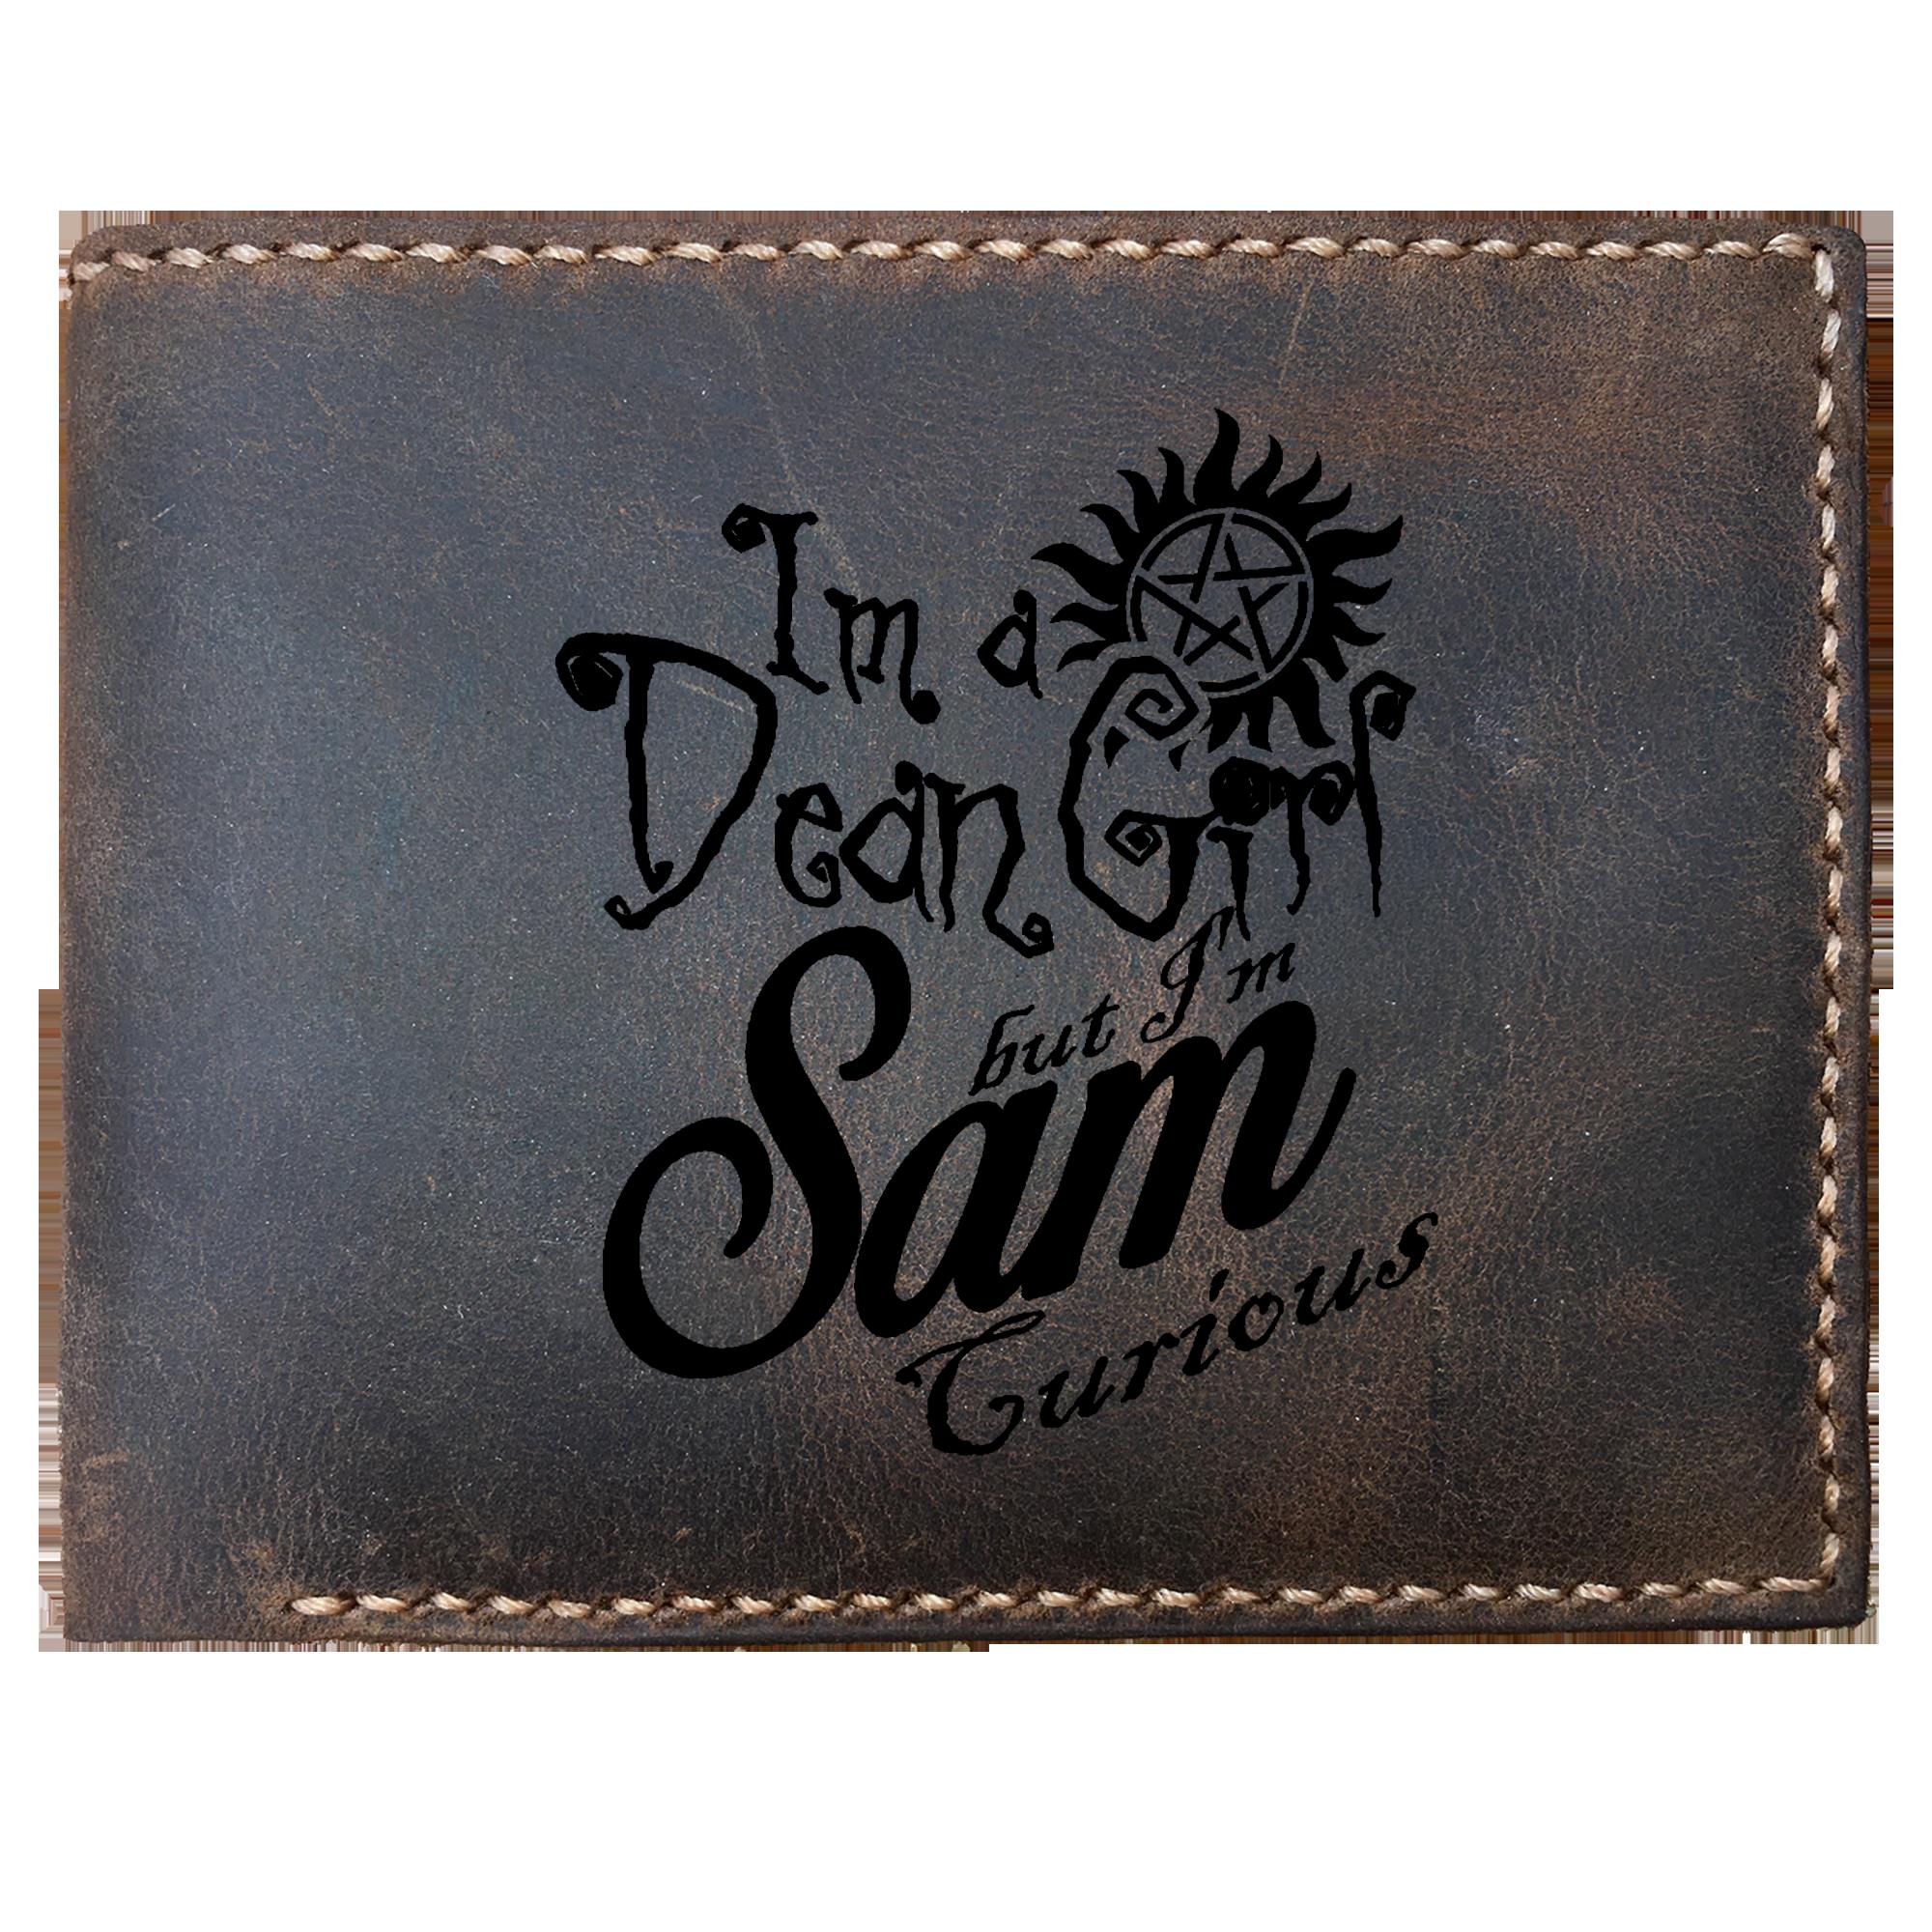 Skitongifts Funny Custom Laser Engraved Bifold Leather Wallet For Men, Im A Dean Girl But Im Sam Curious